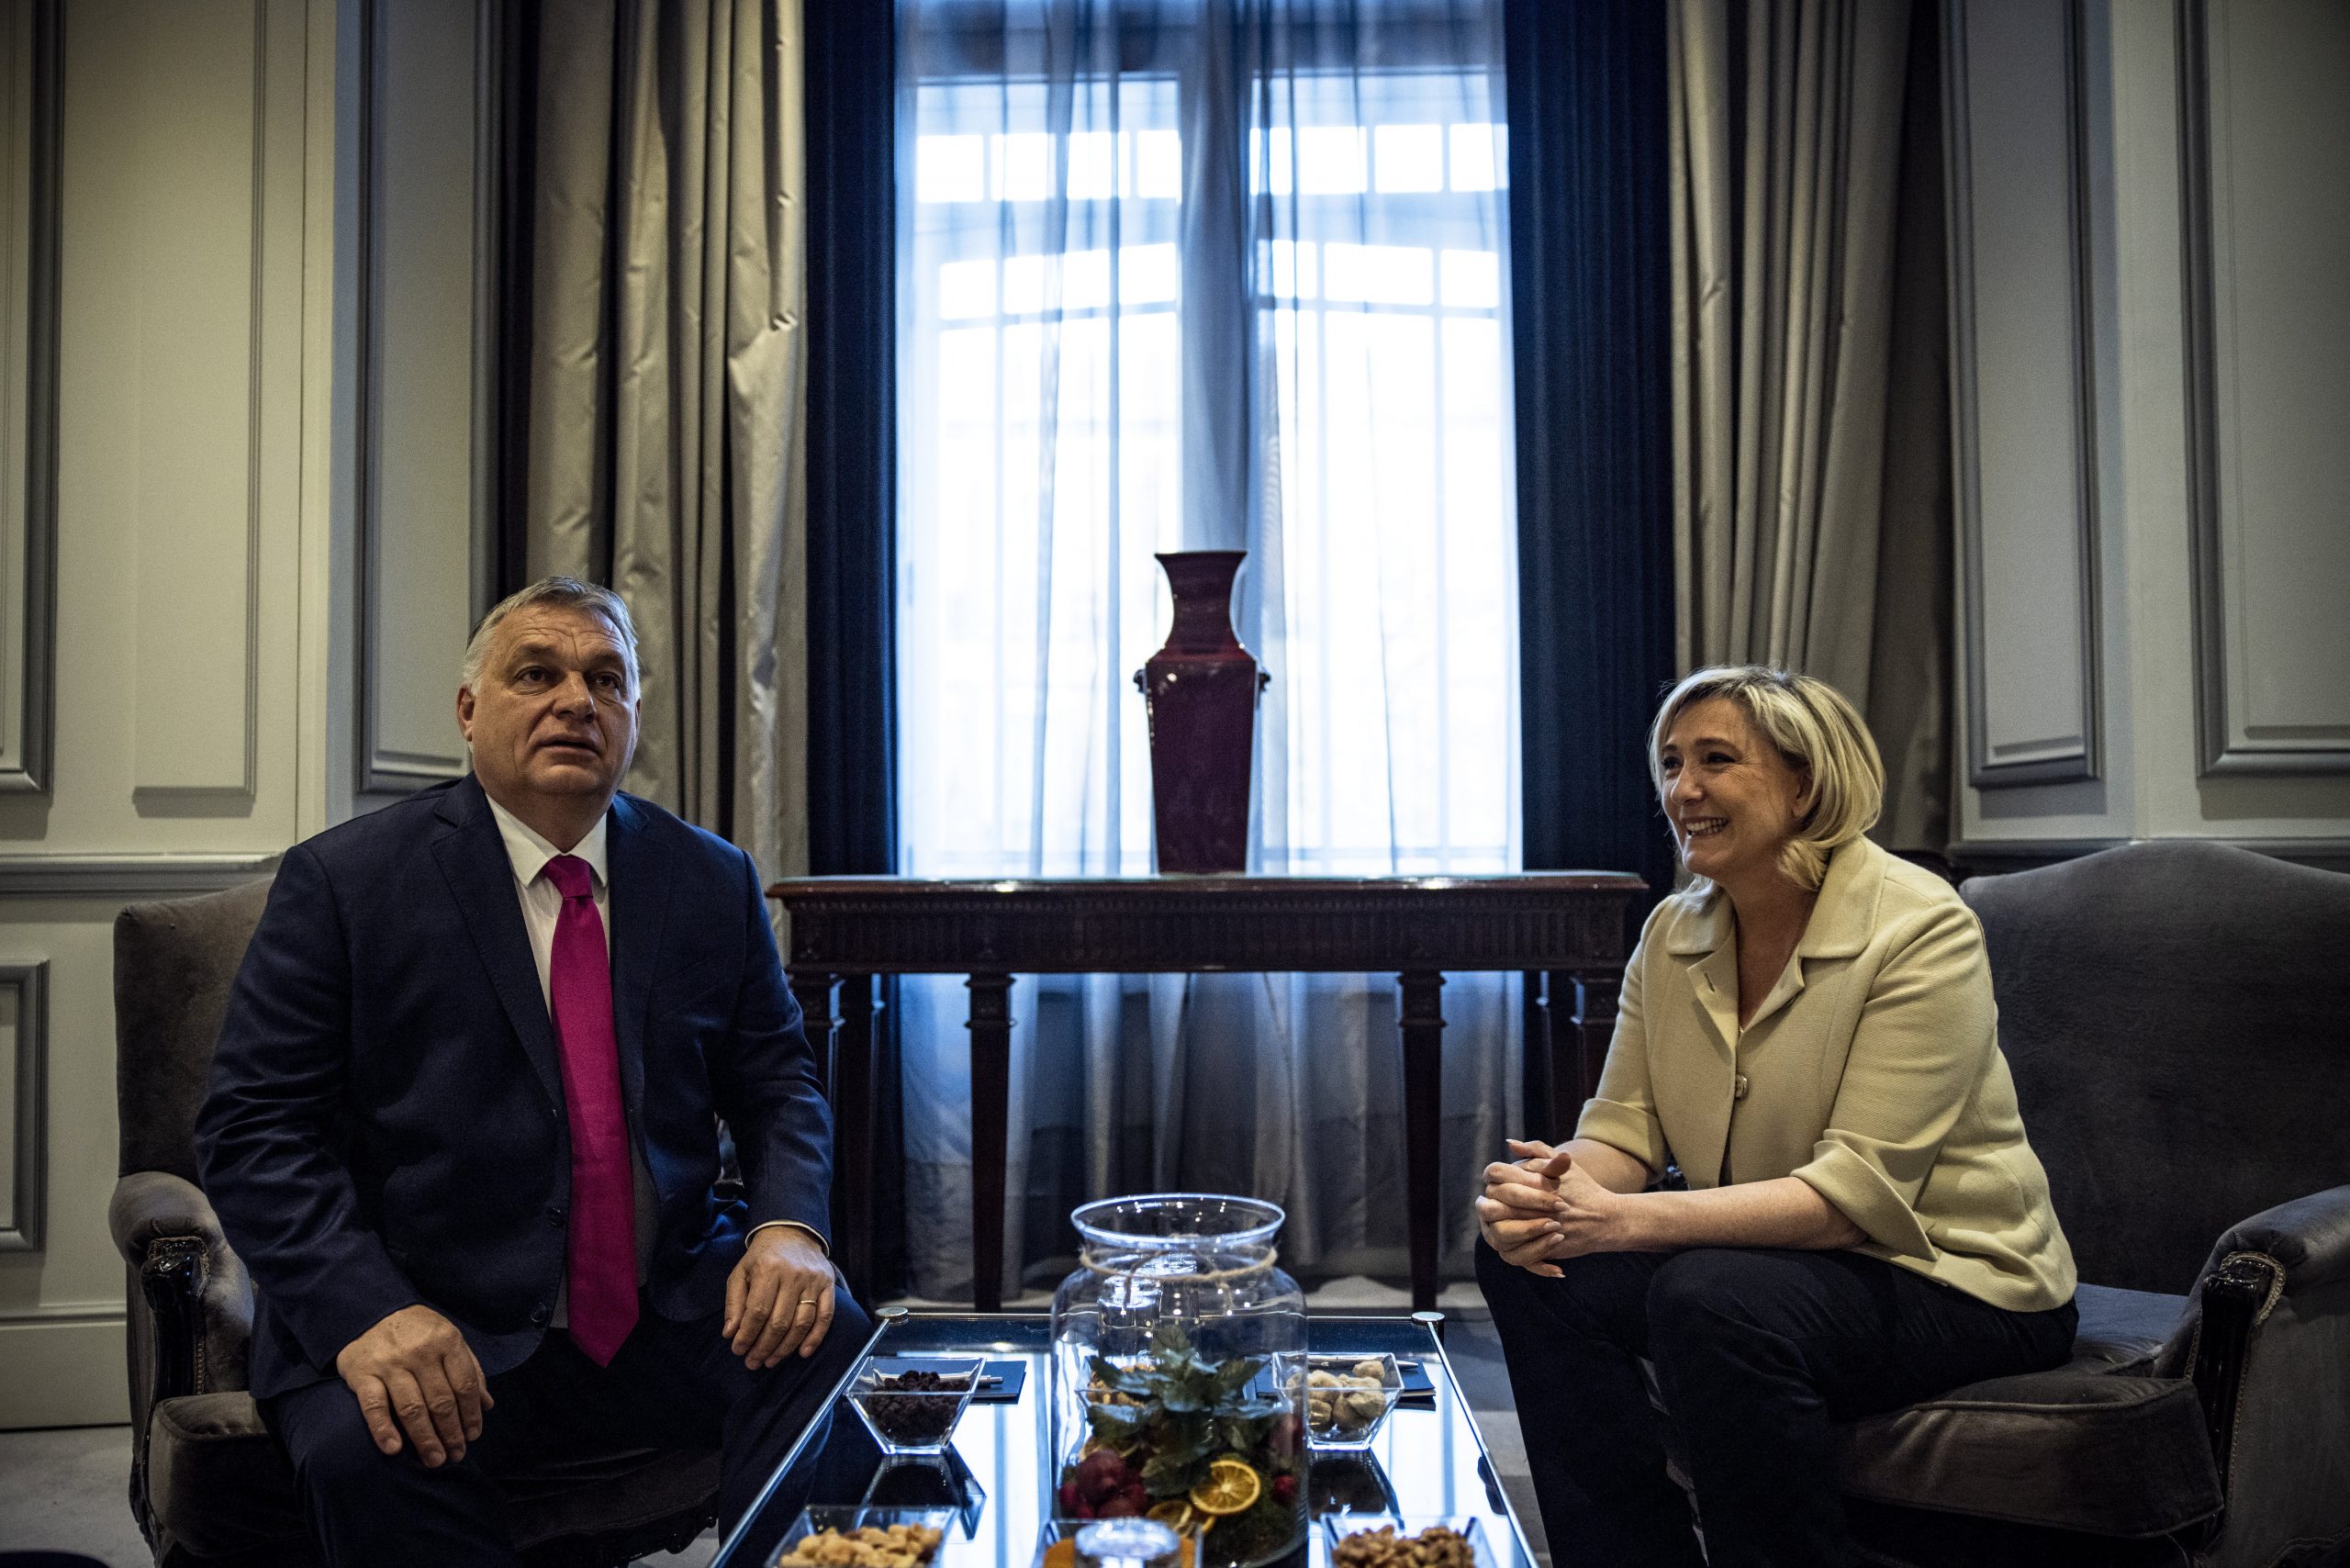 PM Orbán Speaks to Le Pen About Closer Cooperation in EU’s Right-Wing